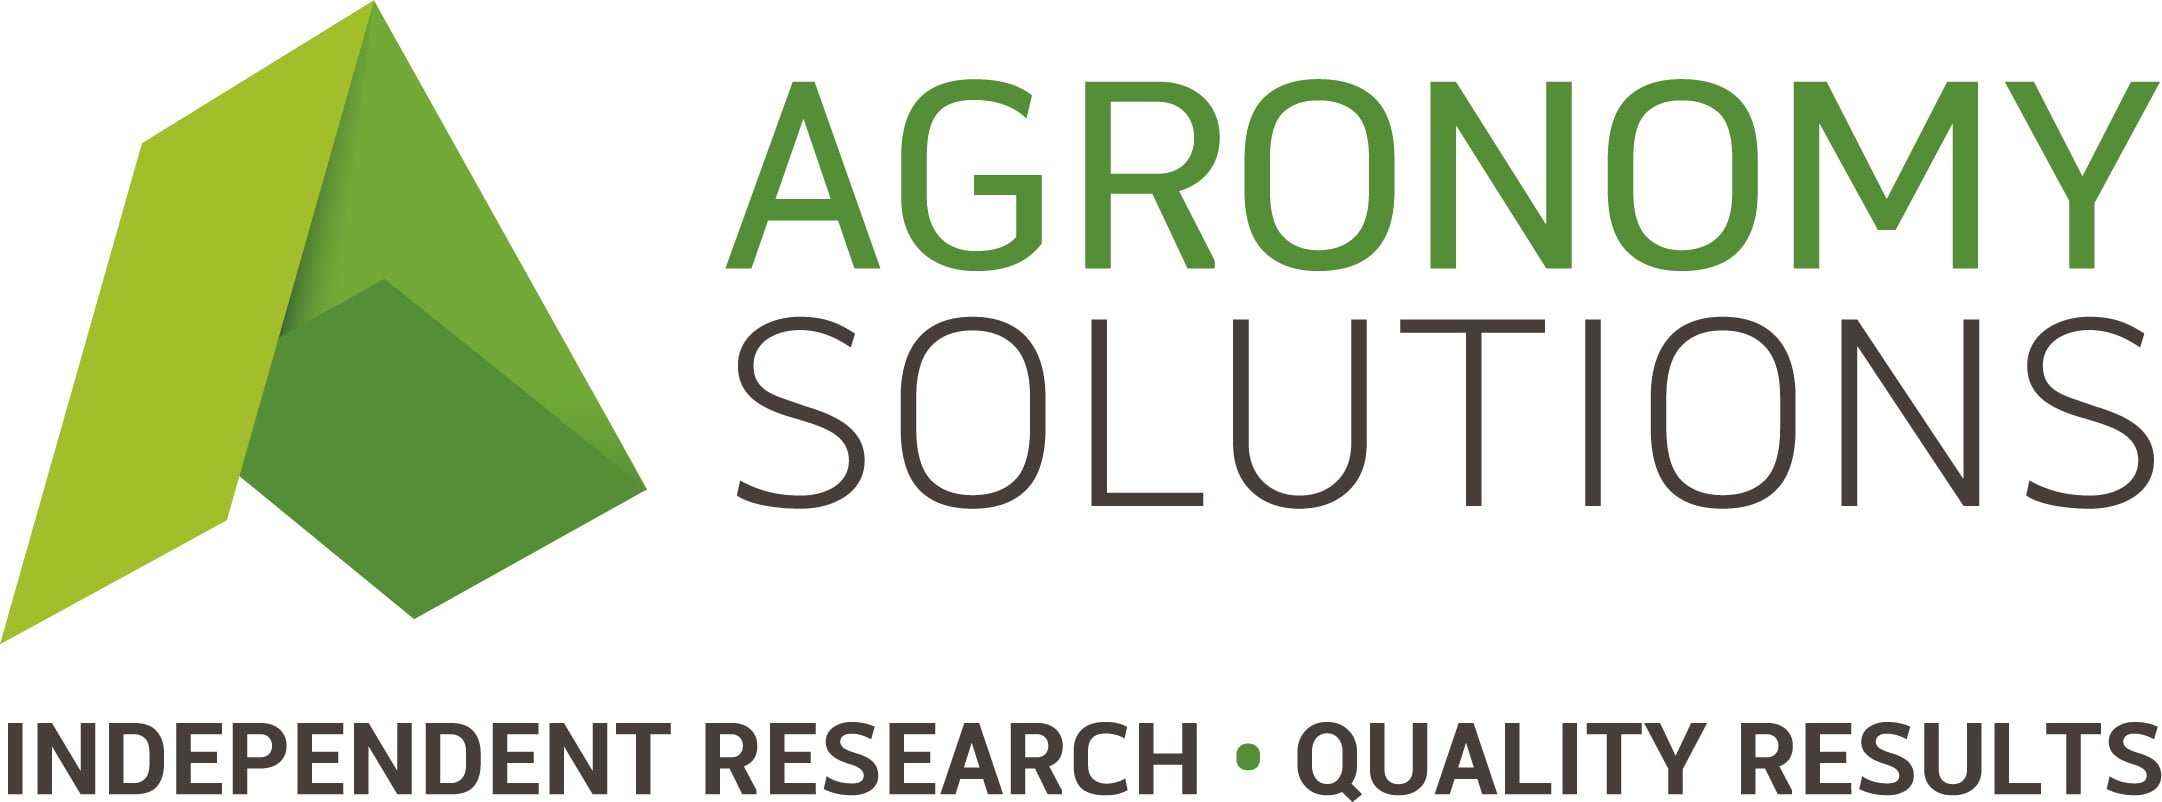 Agronomy Solutions